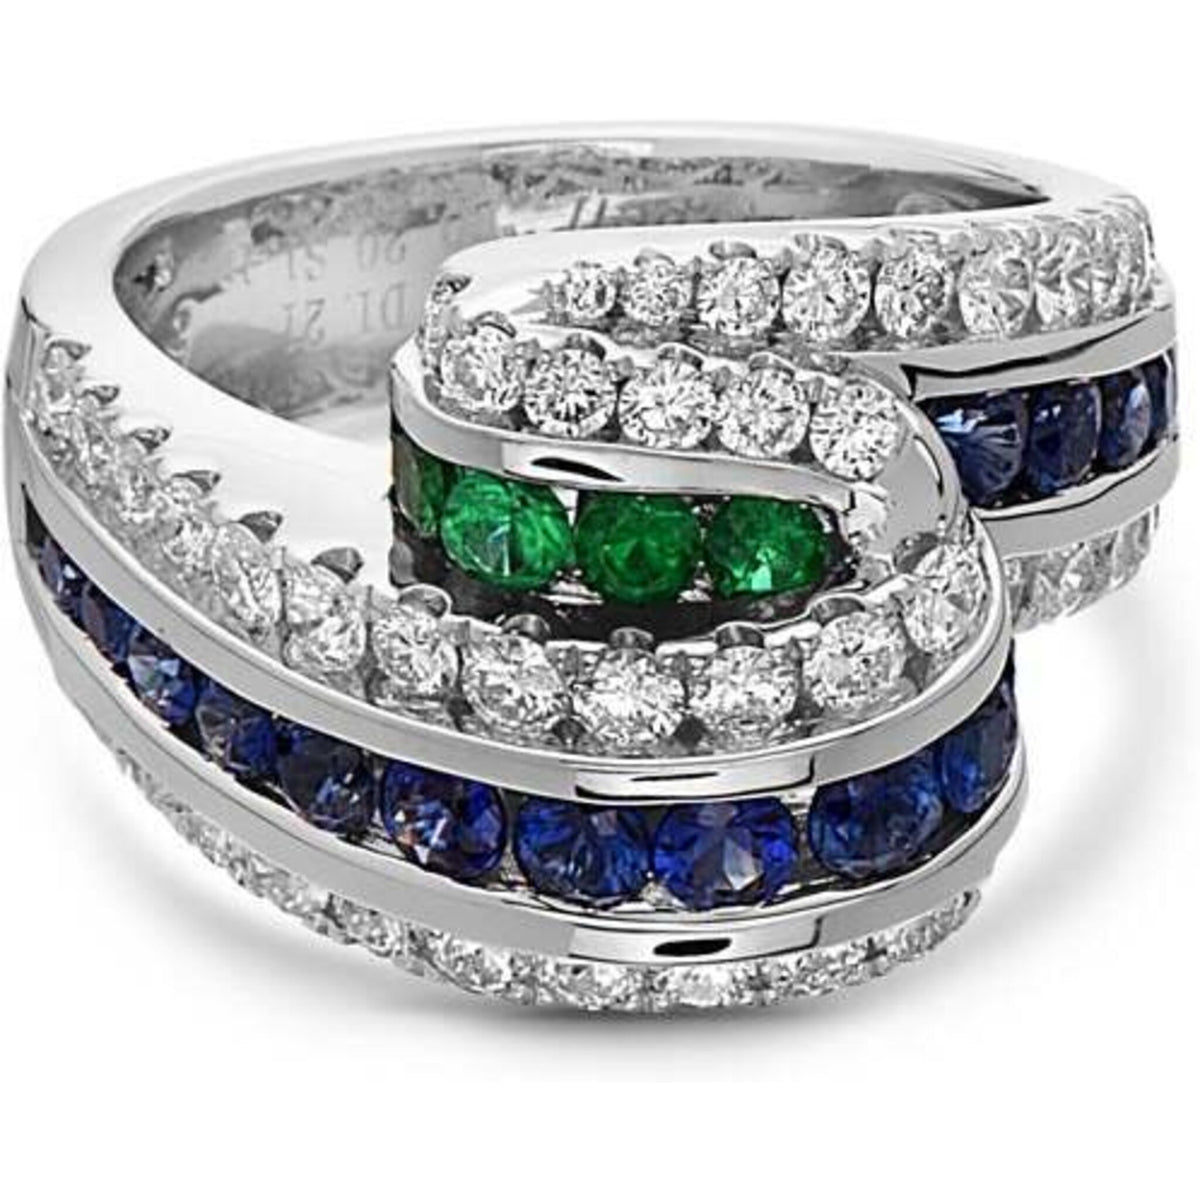 Charles Krypell - Krypell Collection Diamond Triple Fold Ring - Sapphire & Emerald